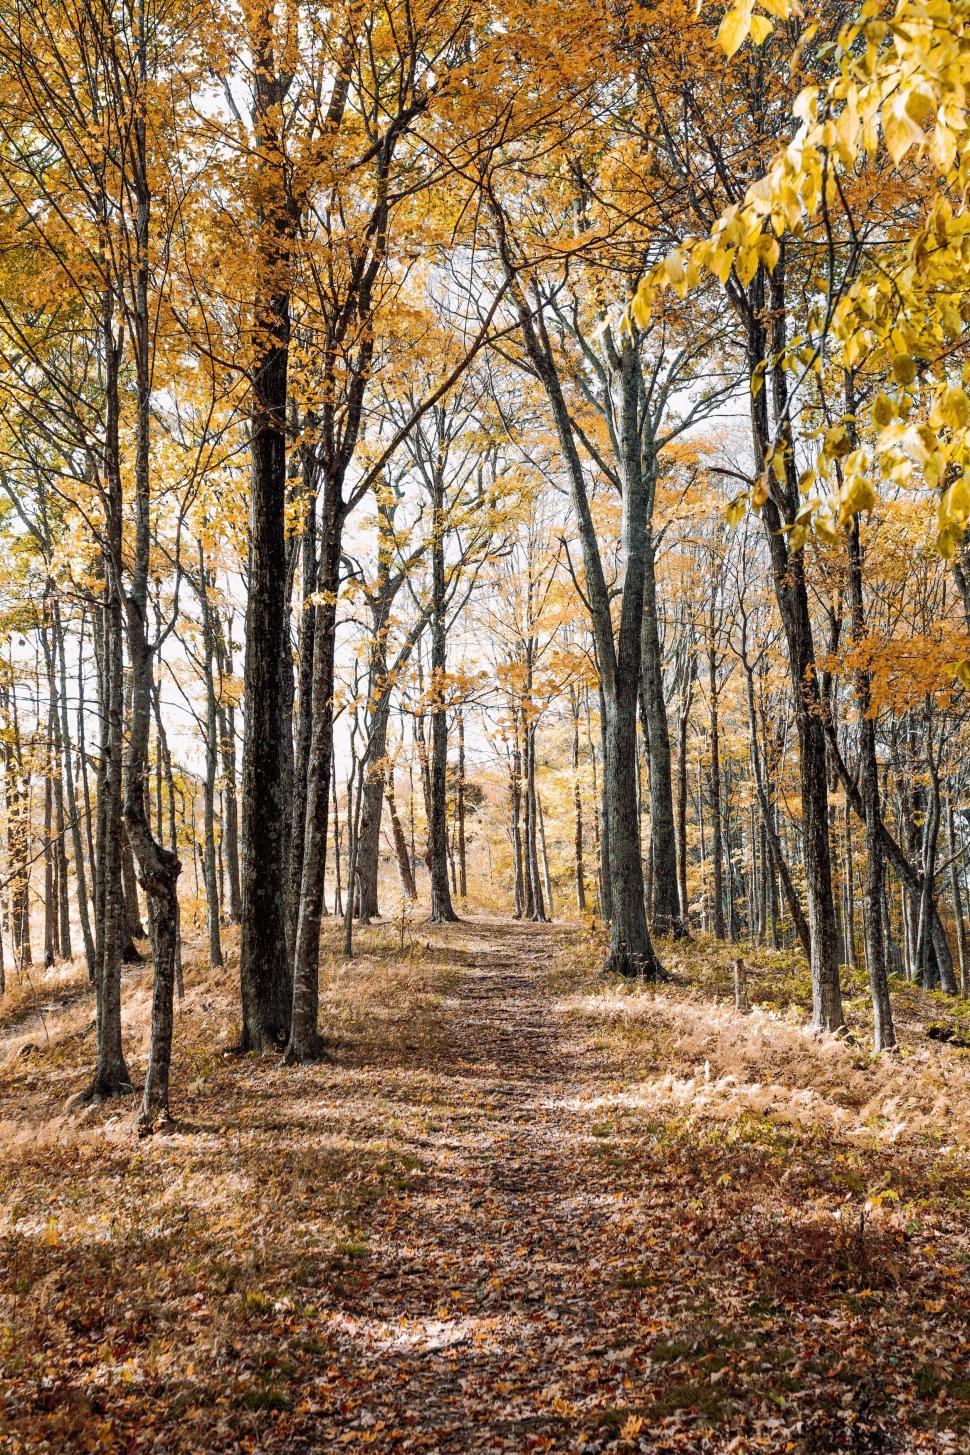 Free Image of Dirt Road Surrounded by Trees With Yellow Leaves 